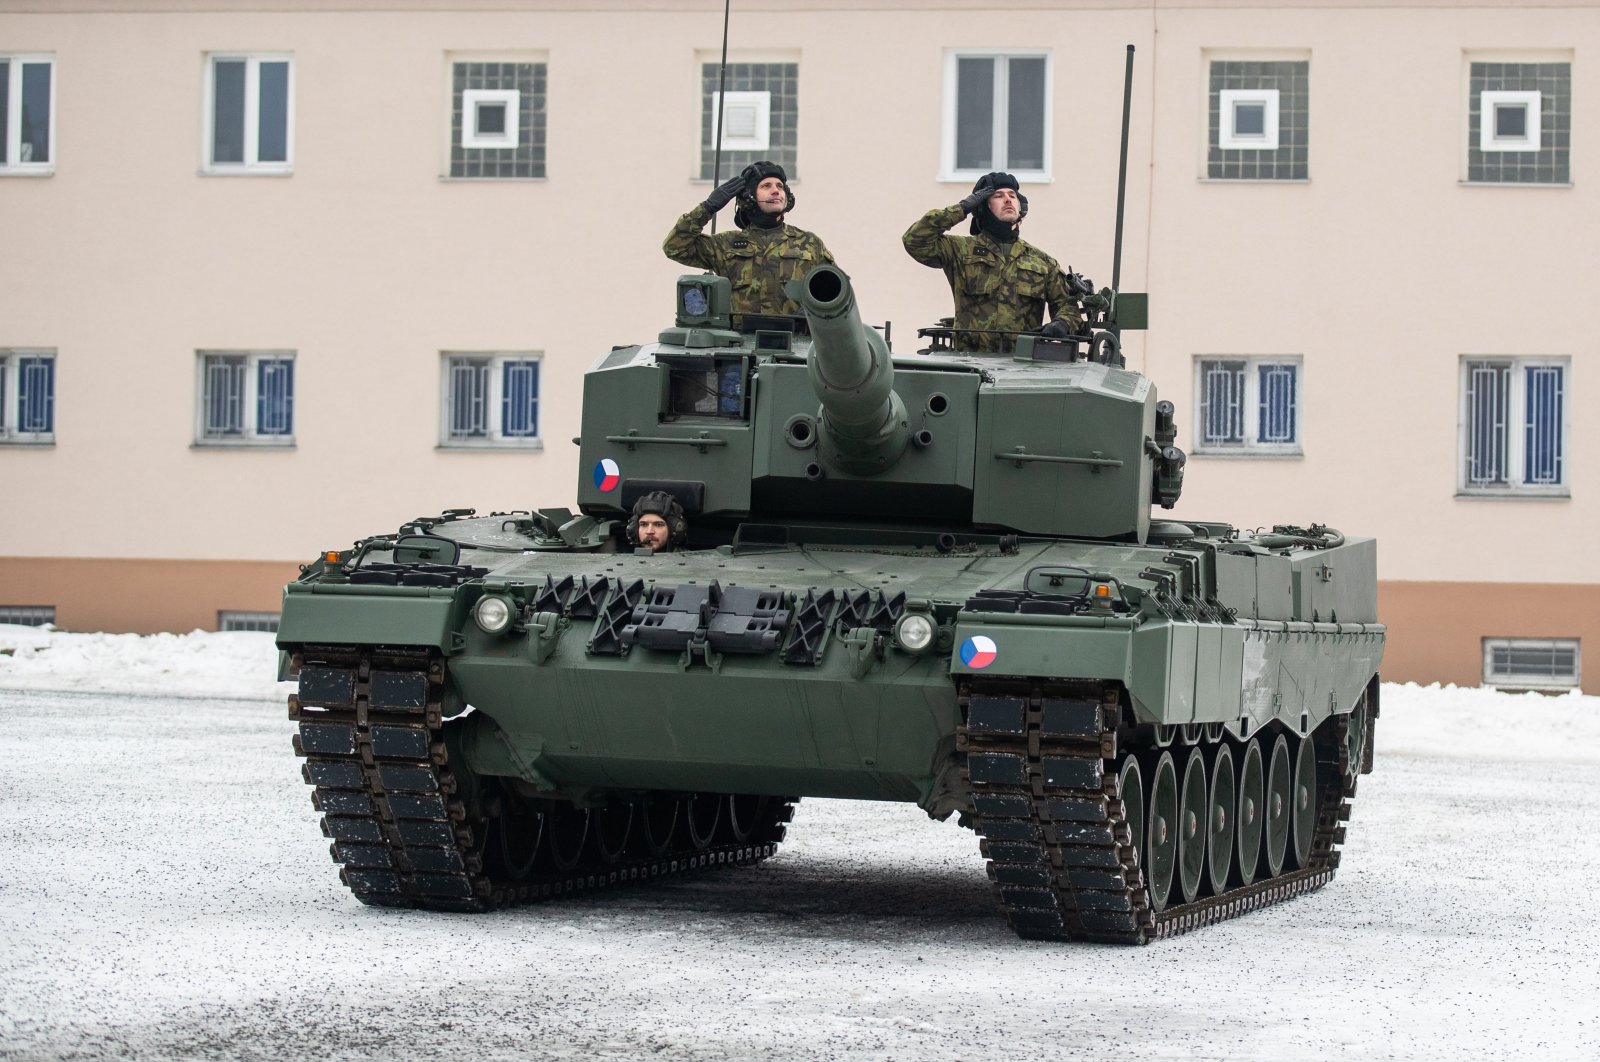 Czech soldiers salute from a Leopard 2A4 tank during a ceremony for the hand over of the symbolic key of the tank to the Czech army, in Praslavice, Czech Republic, Dec. 21, 2022. (EPA Photo)